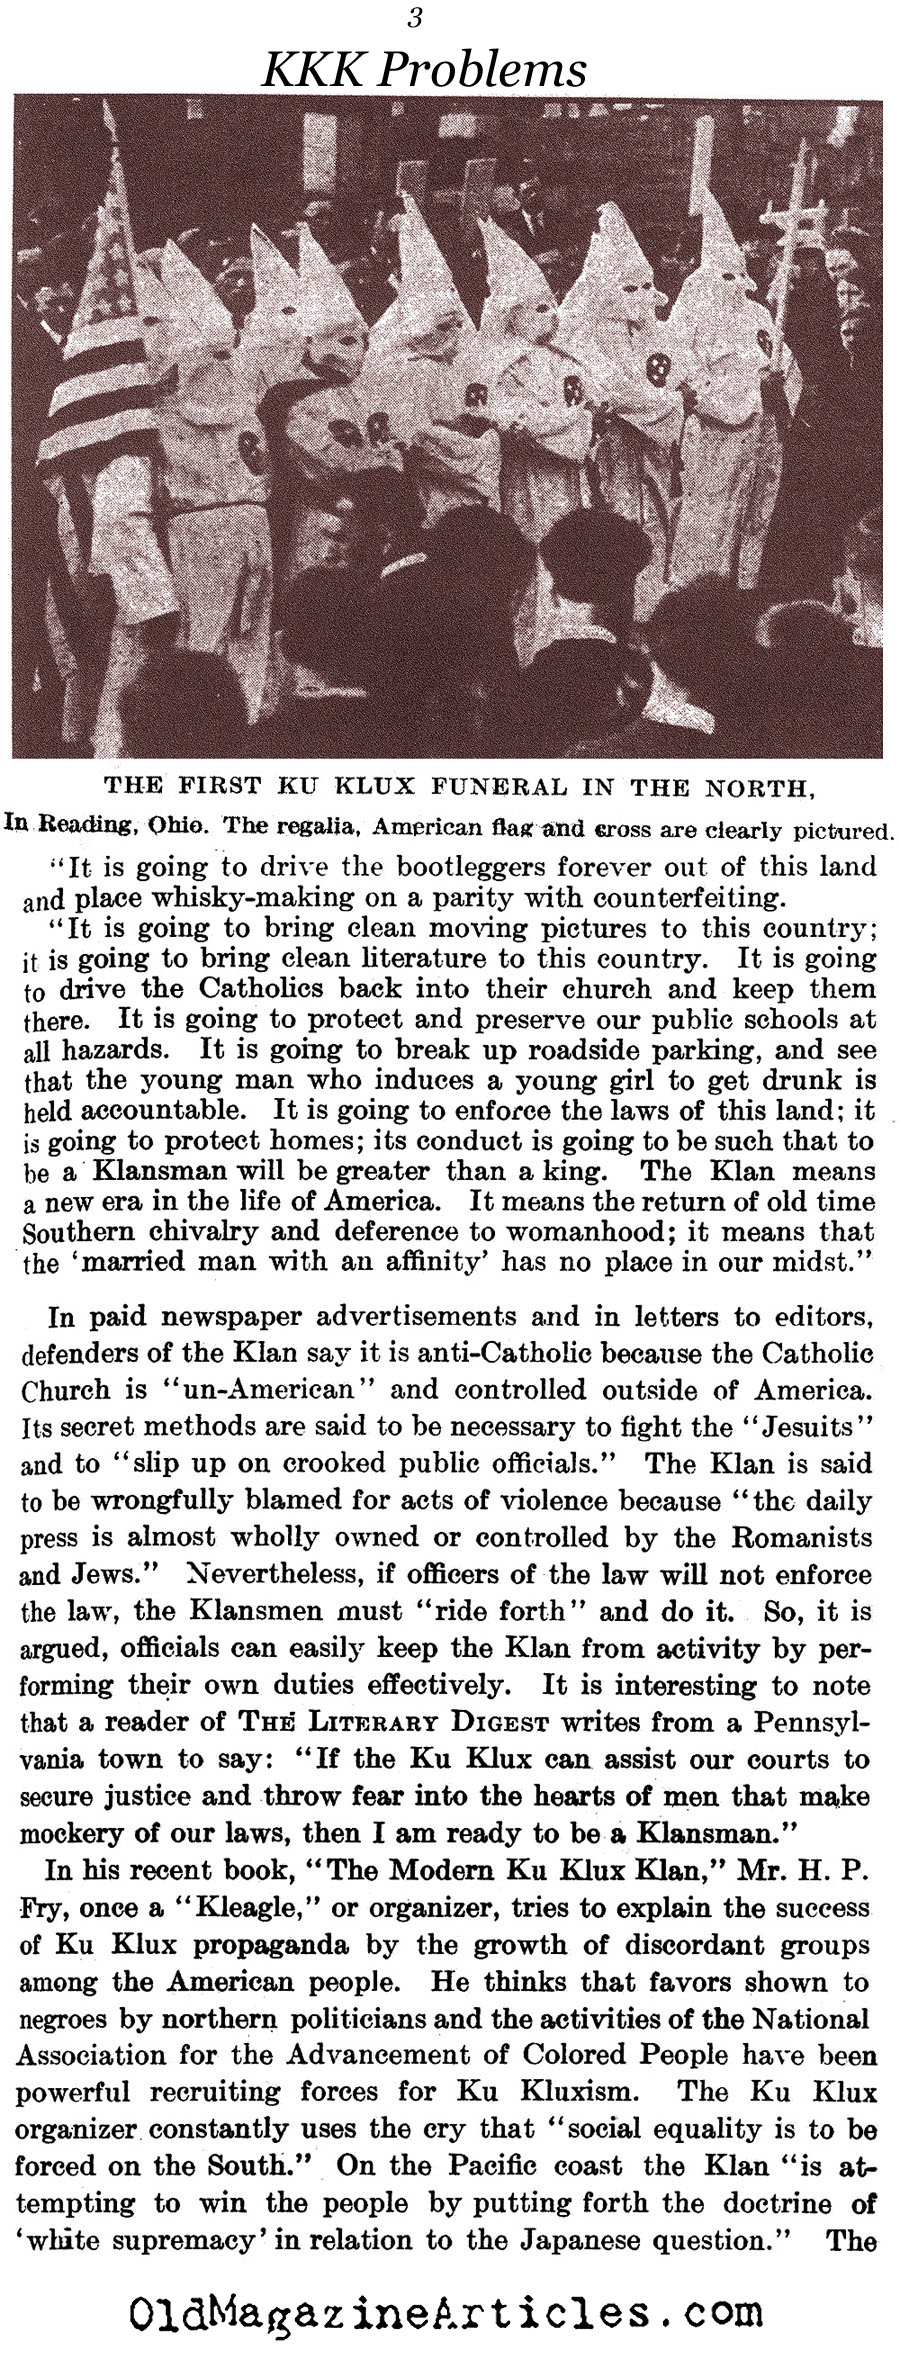 The Klan as a National Problem  (The Literary Digest, 1922)